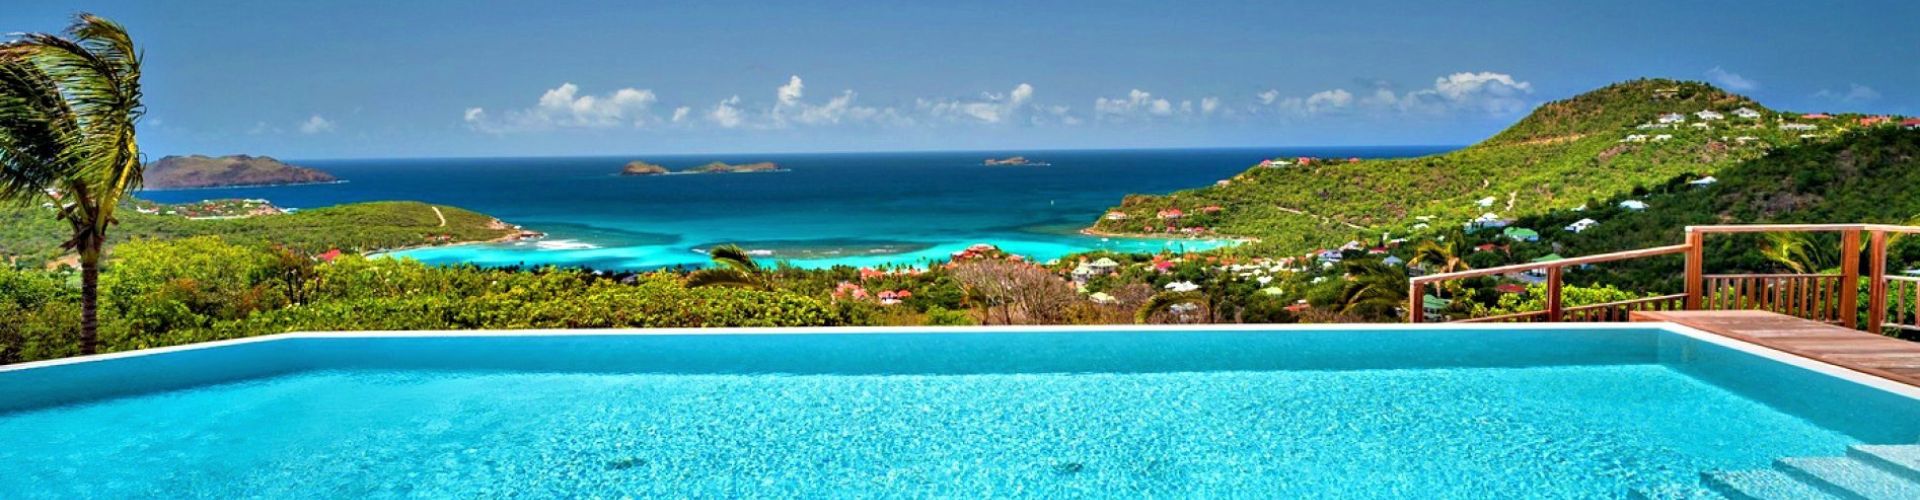 St. Barth's travel guide and packing list - Shellona Le Toiny and Nikki  Beach